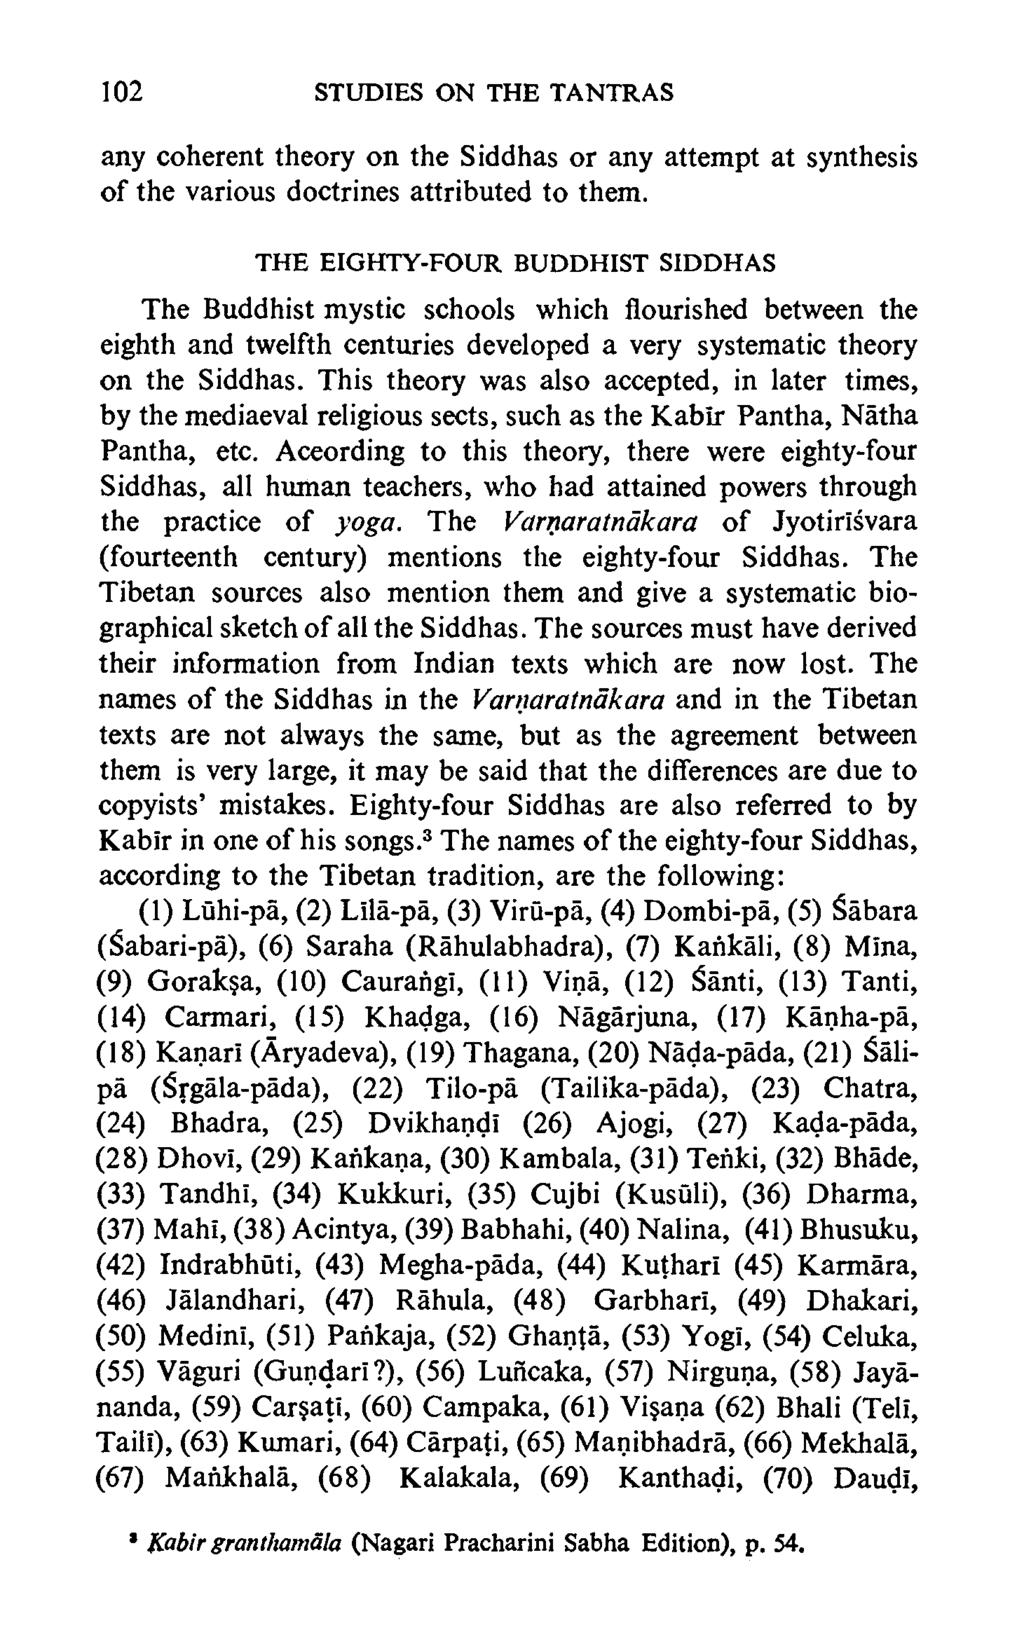 102 STUDIES ON THE TANTRAS any coherent theory on the Siddhas or any attempt at synthesis of the various doctrines attributed to them.